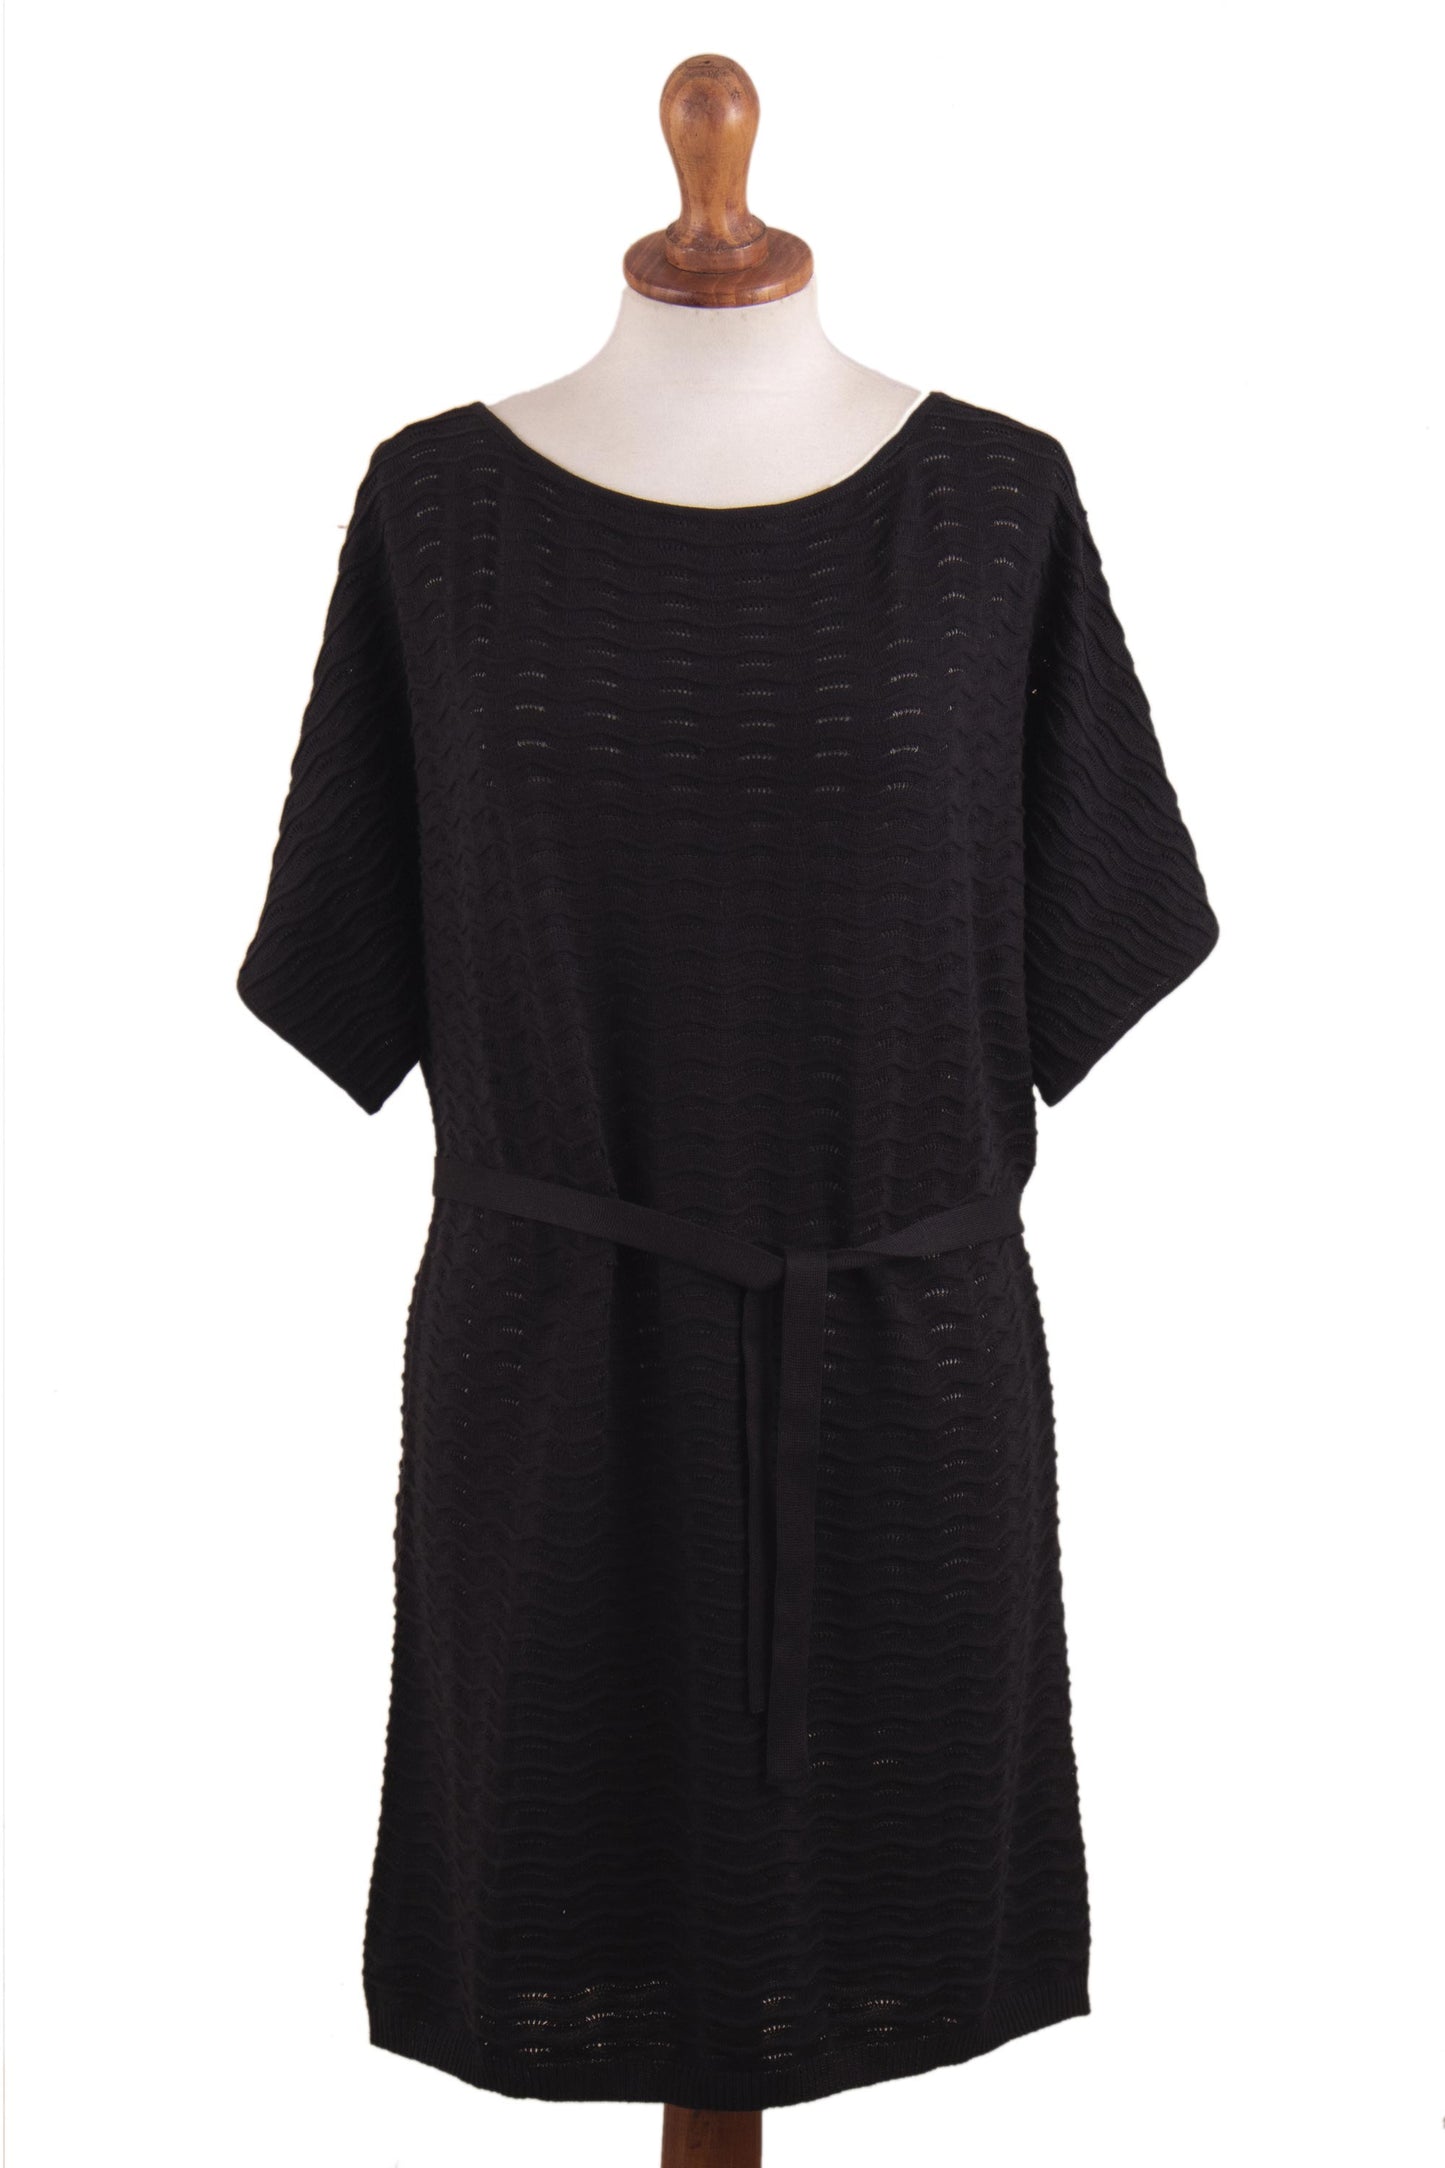 Thalu in Black Cotton Knitted Belted T-Shirt Dress in Black from Peru